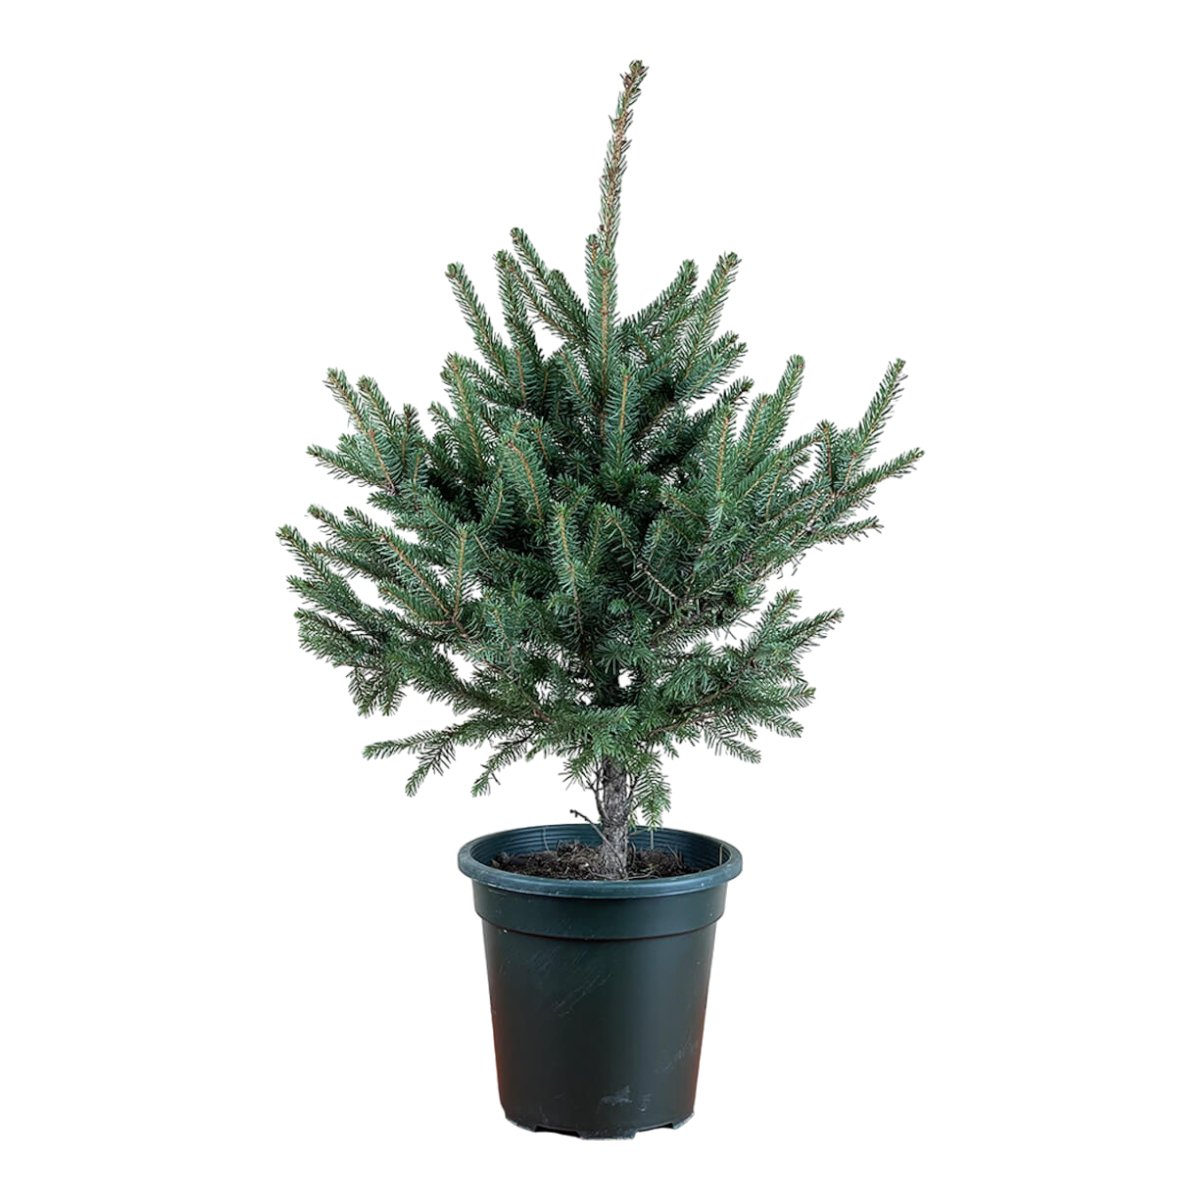 Tiny Tim Christmas Tree - brown moon pot - large - Gifting plant - Tumbleweed Plants - Online Plant Delivery Singapore